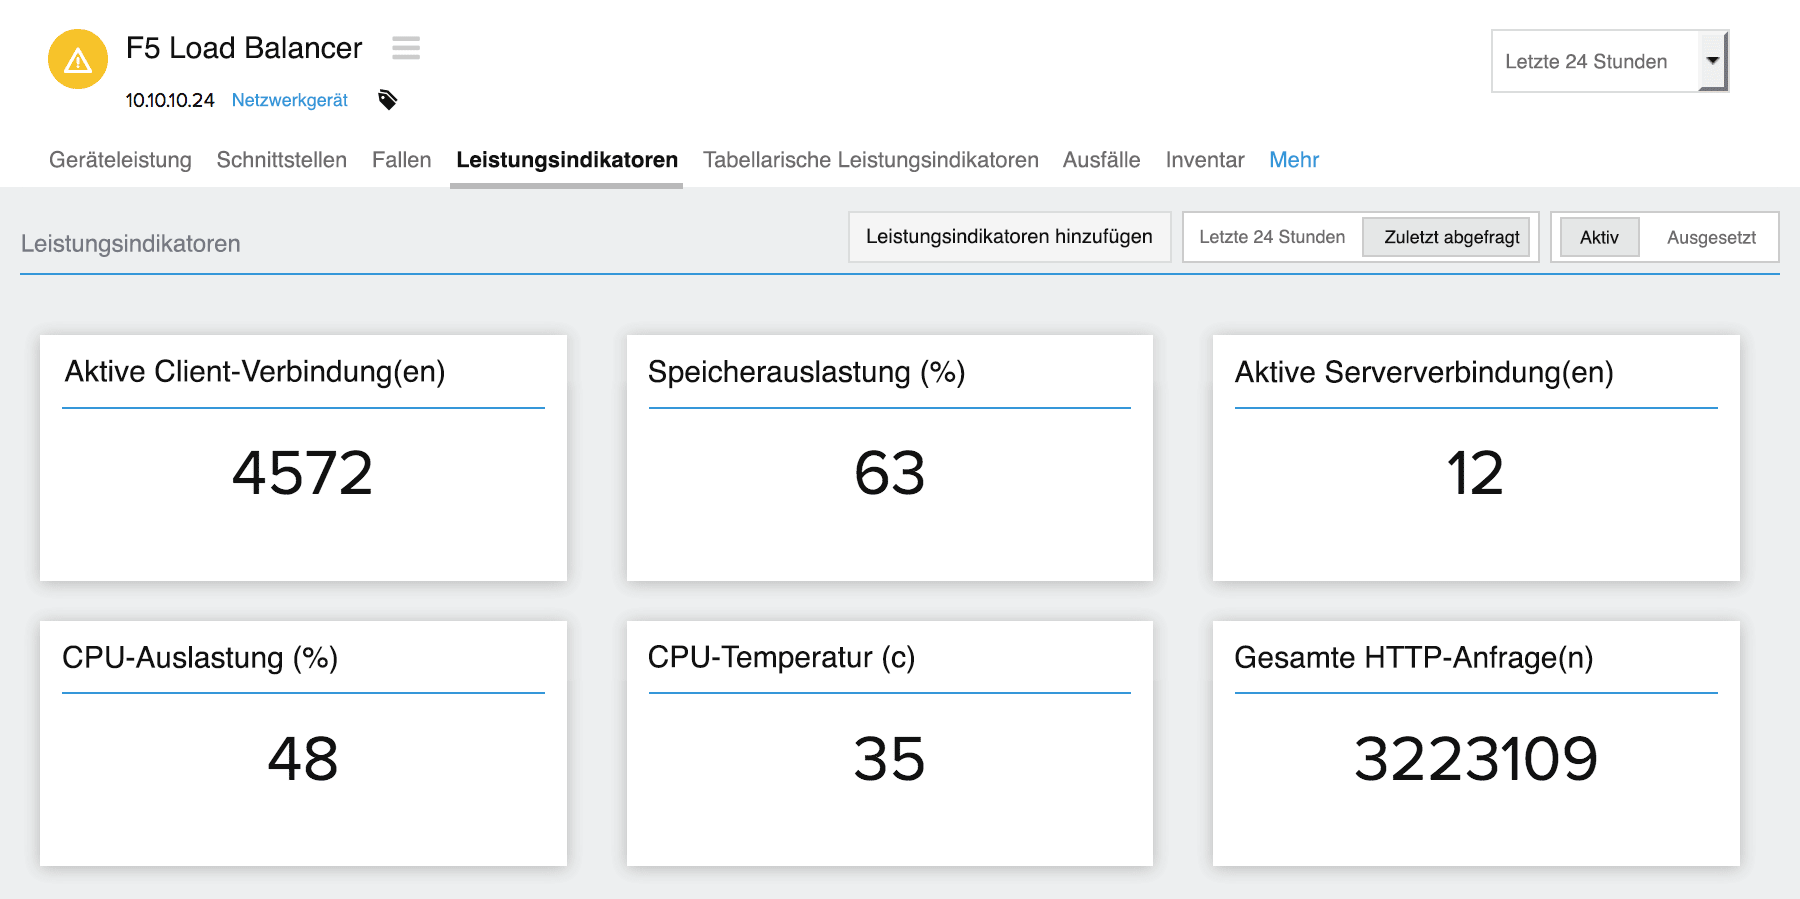 Keep track of your load balancer performance